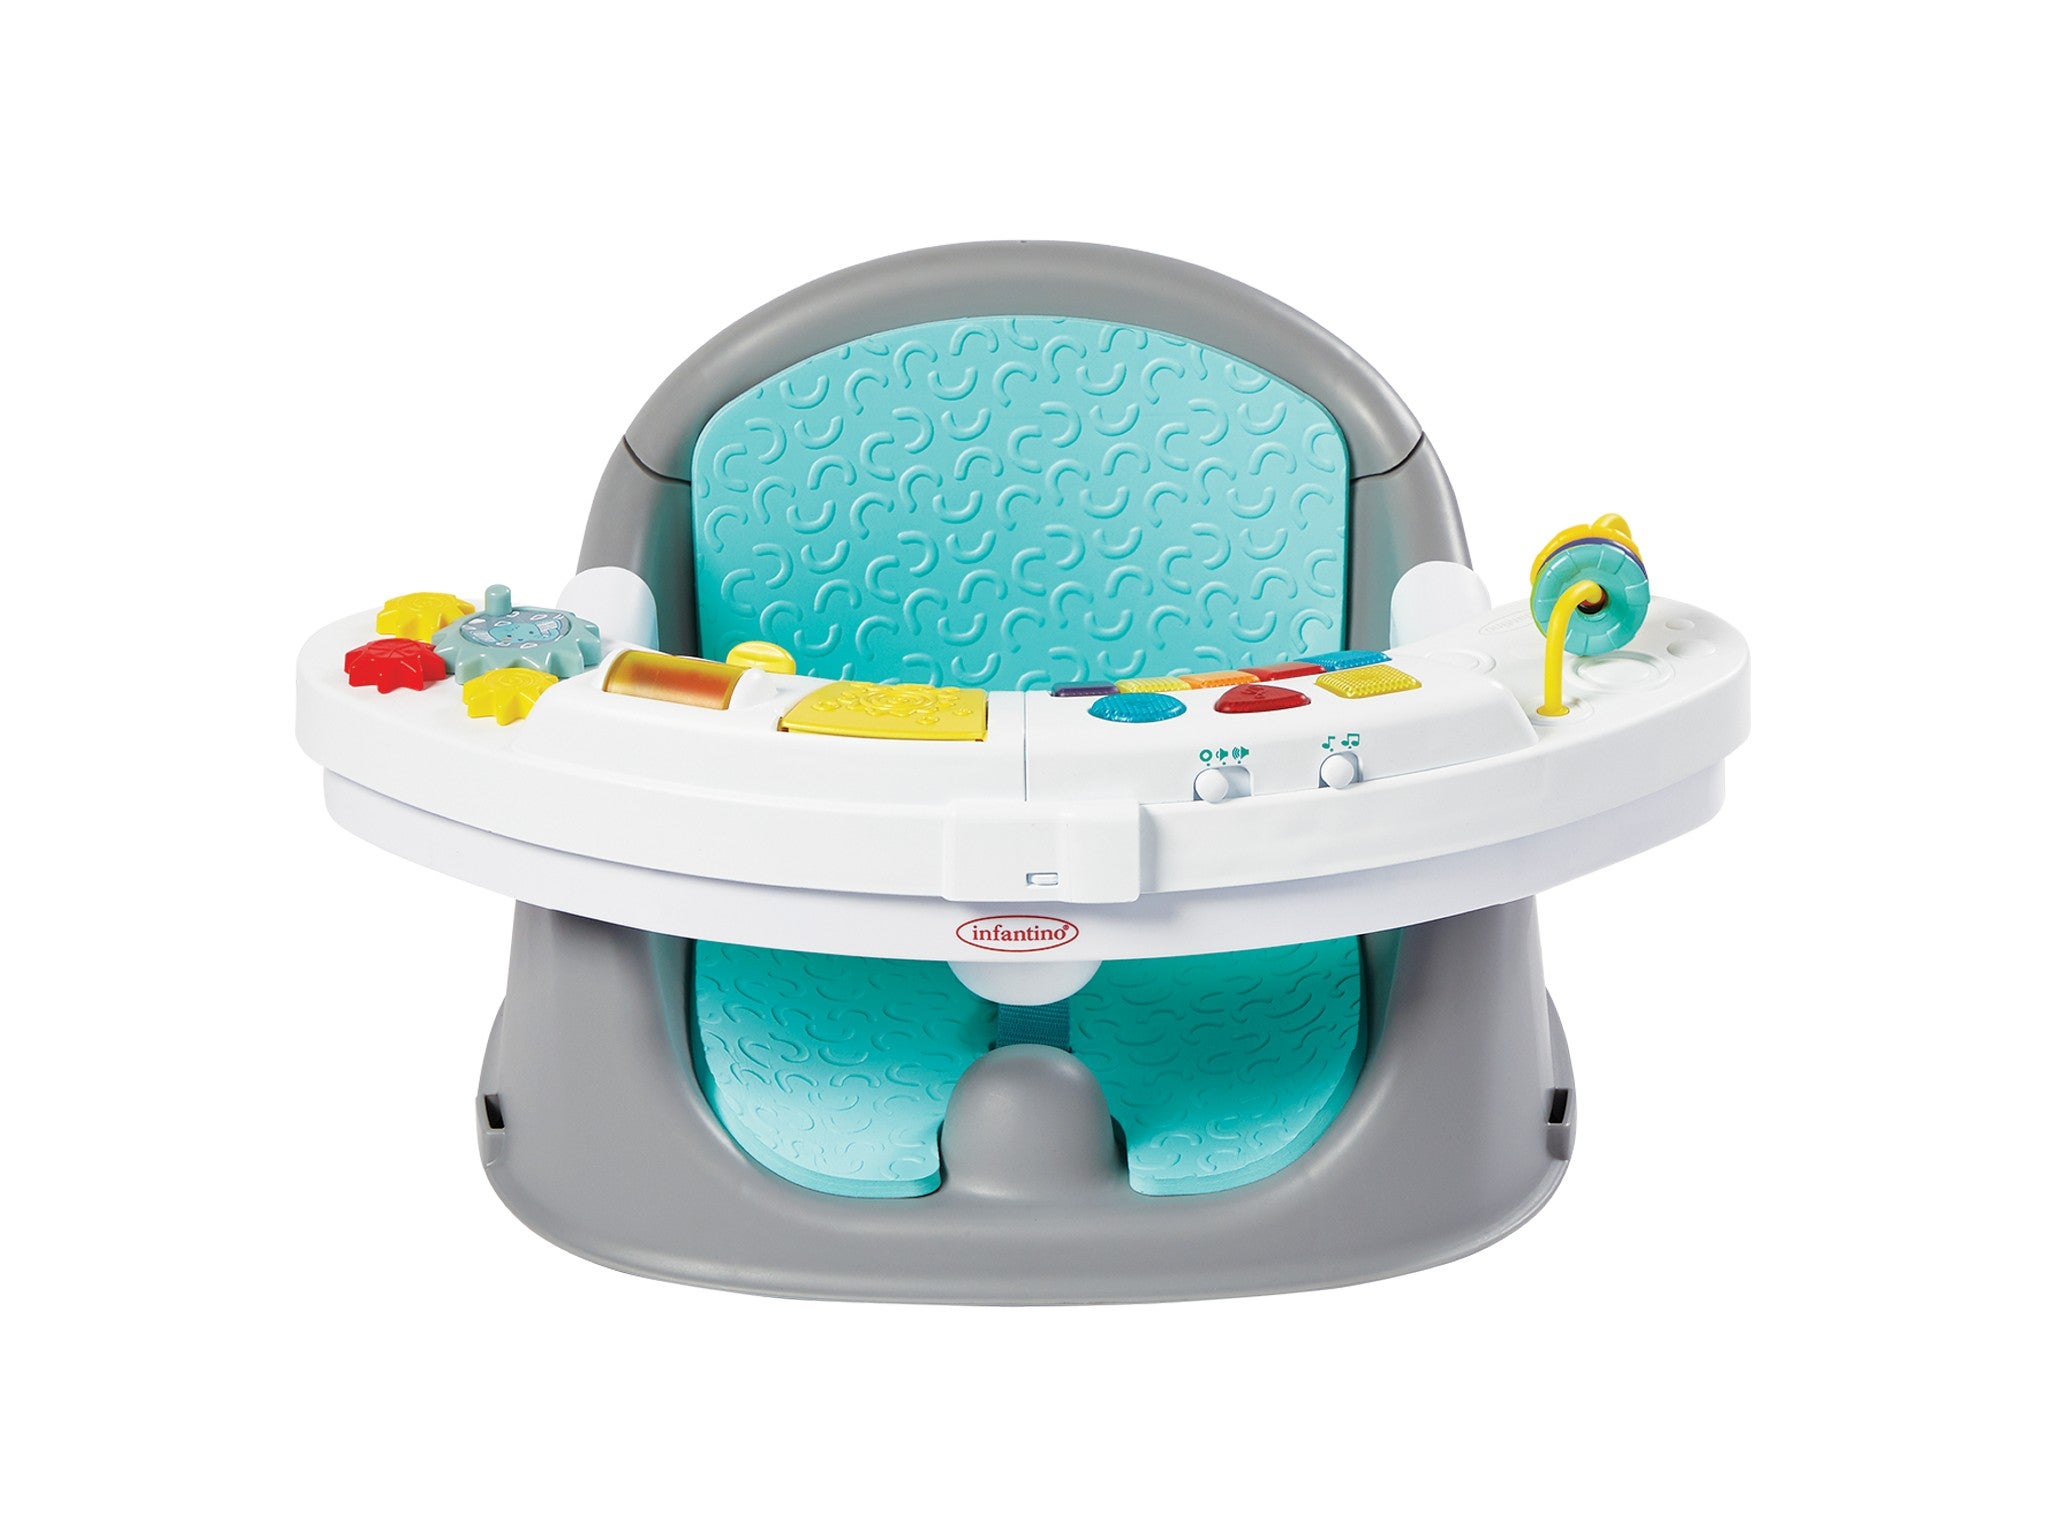 Infantino music & lights 3-in-1 discovery seat and booster indybest.